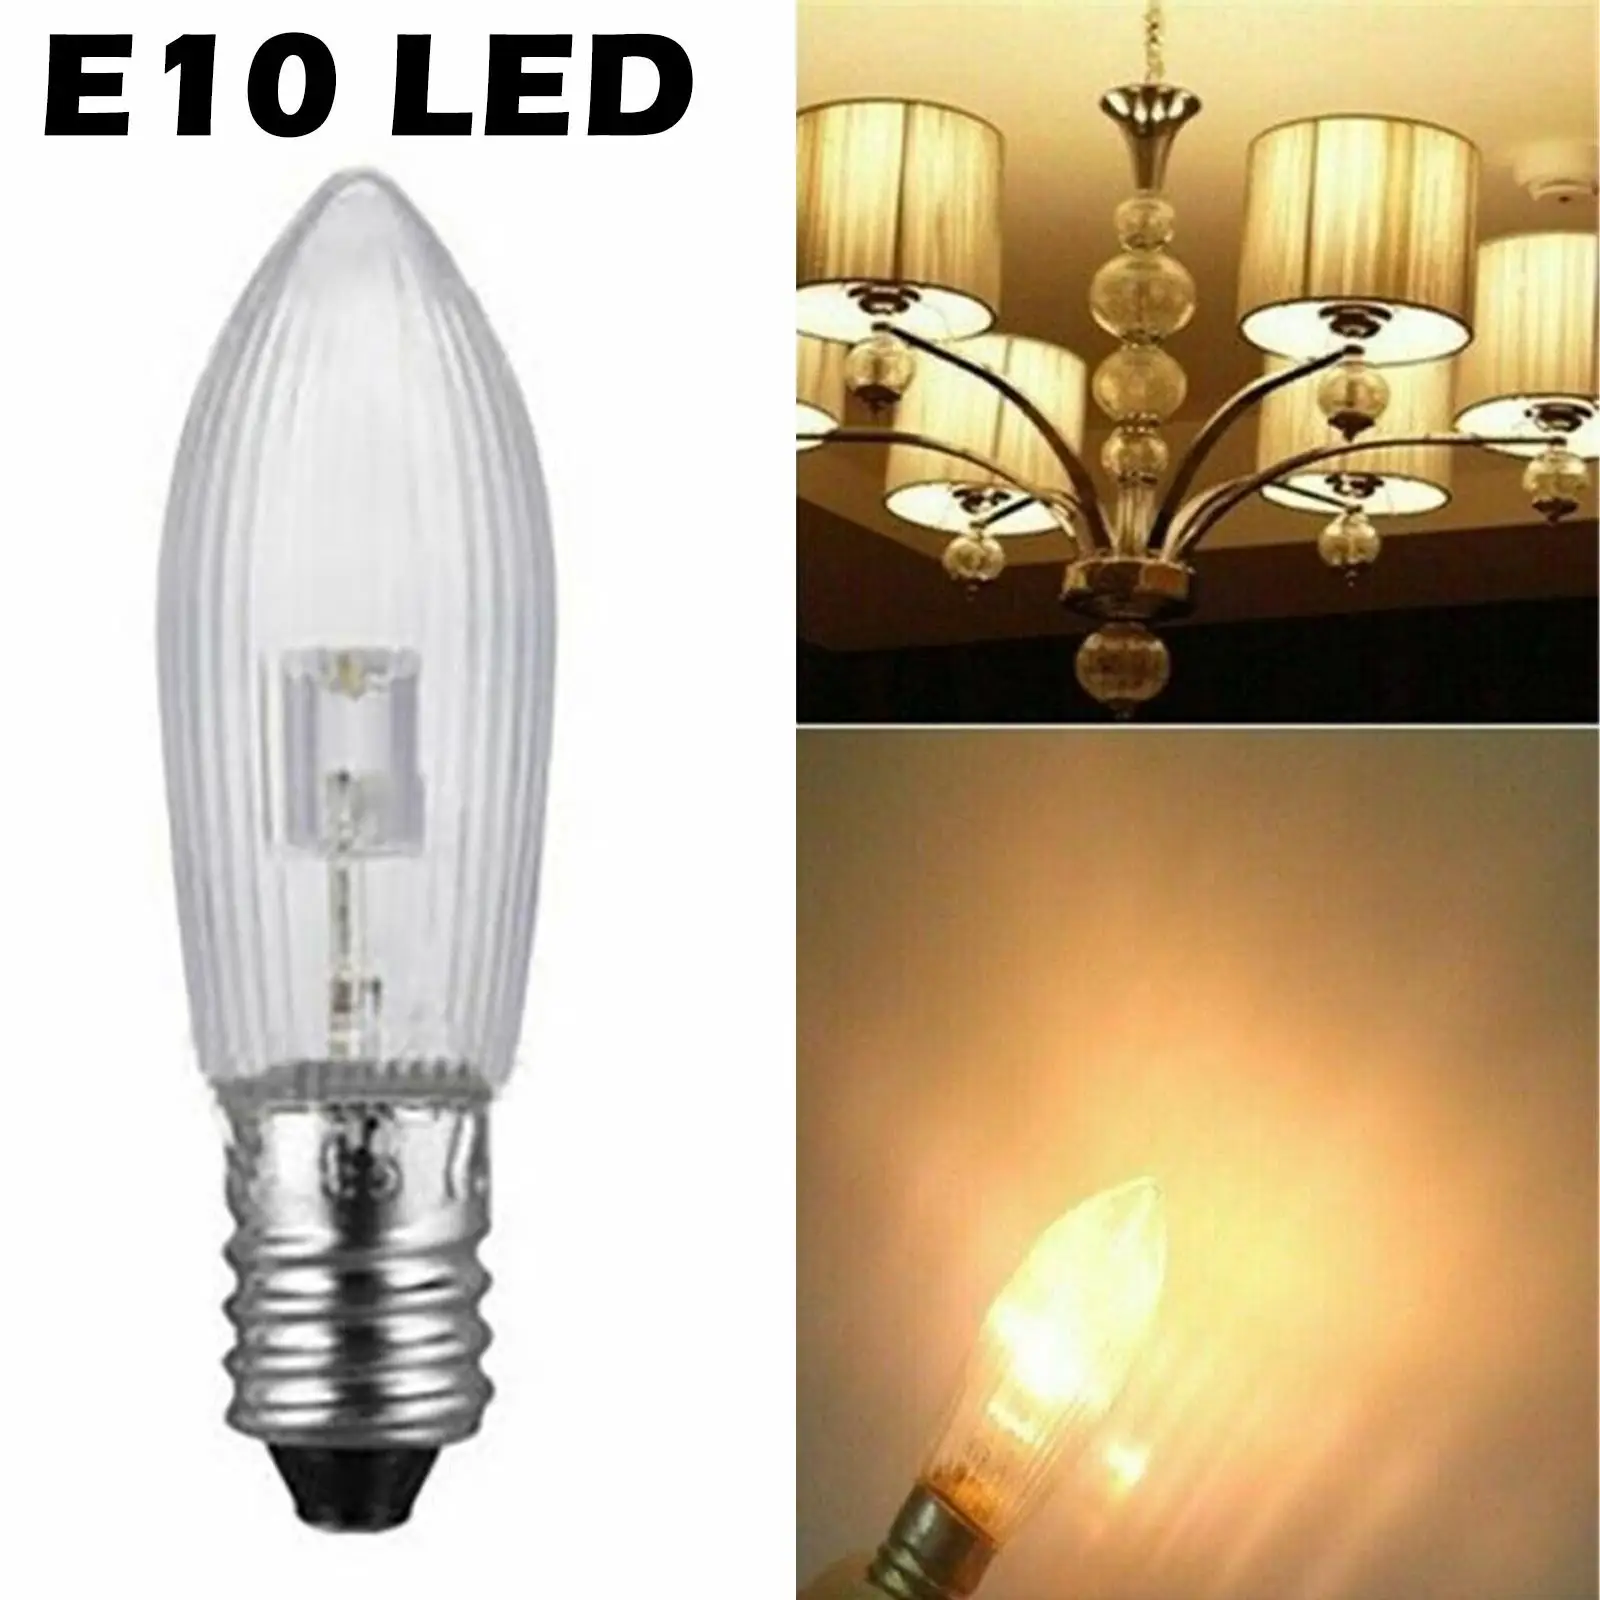 1pc E10 LED Bulbs Light Replacement Lamp Bulbs 10V-55V AC Bathroom Kitchen Home Lamps Bulb Decoration Lights For String Lig O5Q8 large capacity round copper storage tray sundries storage trays jewelry organizer desk dish home decoration kitchen storage